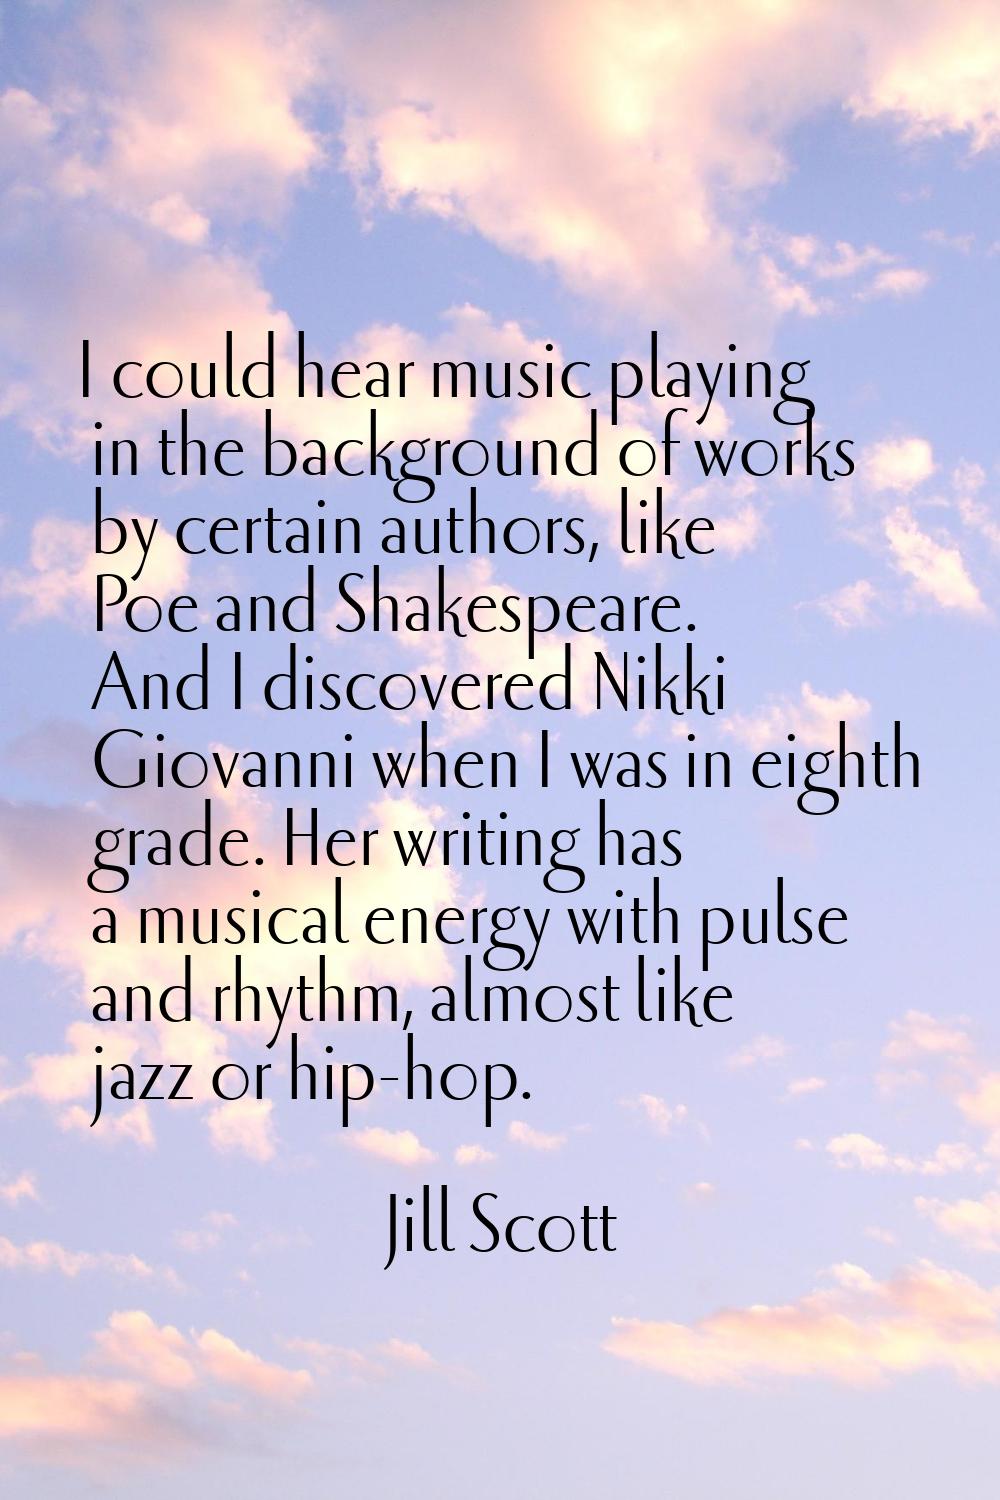 I could hear music playing in the background of works by certain authors, like Poe and Shakespeare.